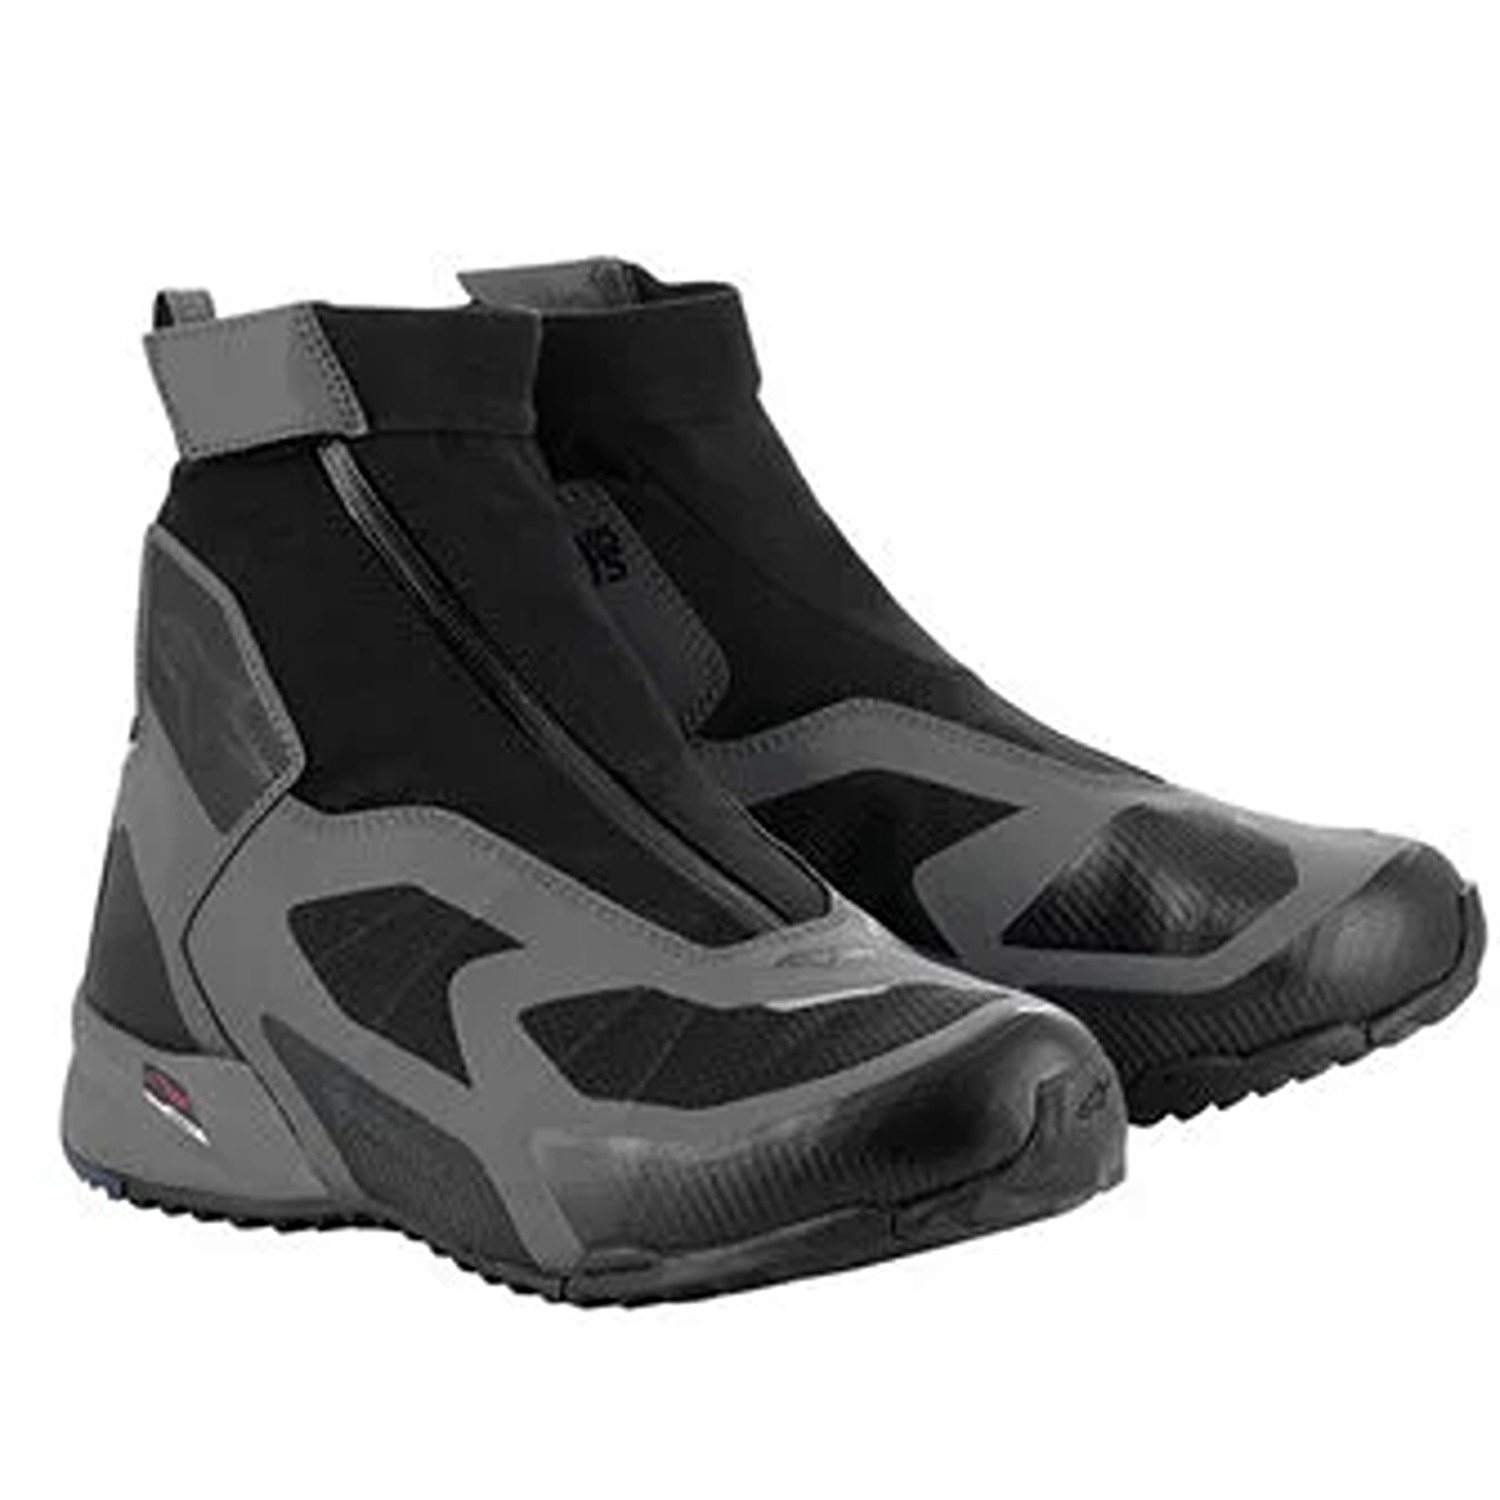 Image of Alpinestars CR-8 Gore-Tex Shoes Black Mid Gray Bright Red Size US 75 EN